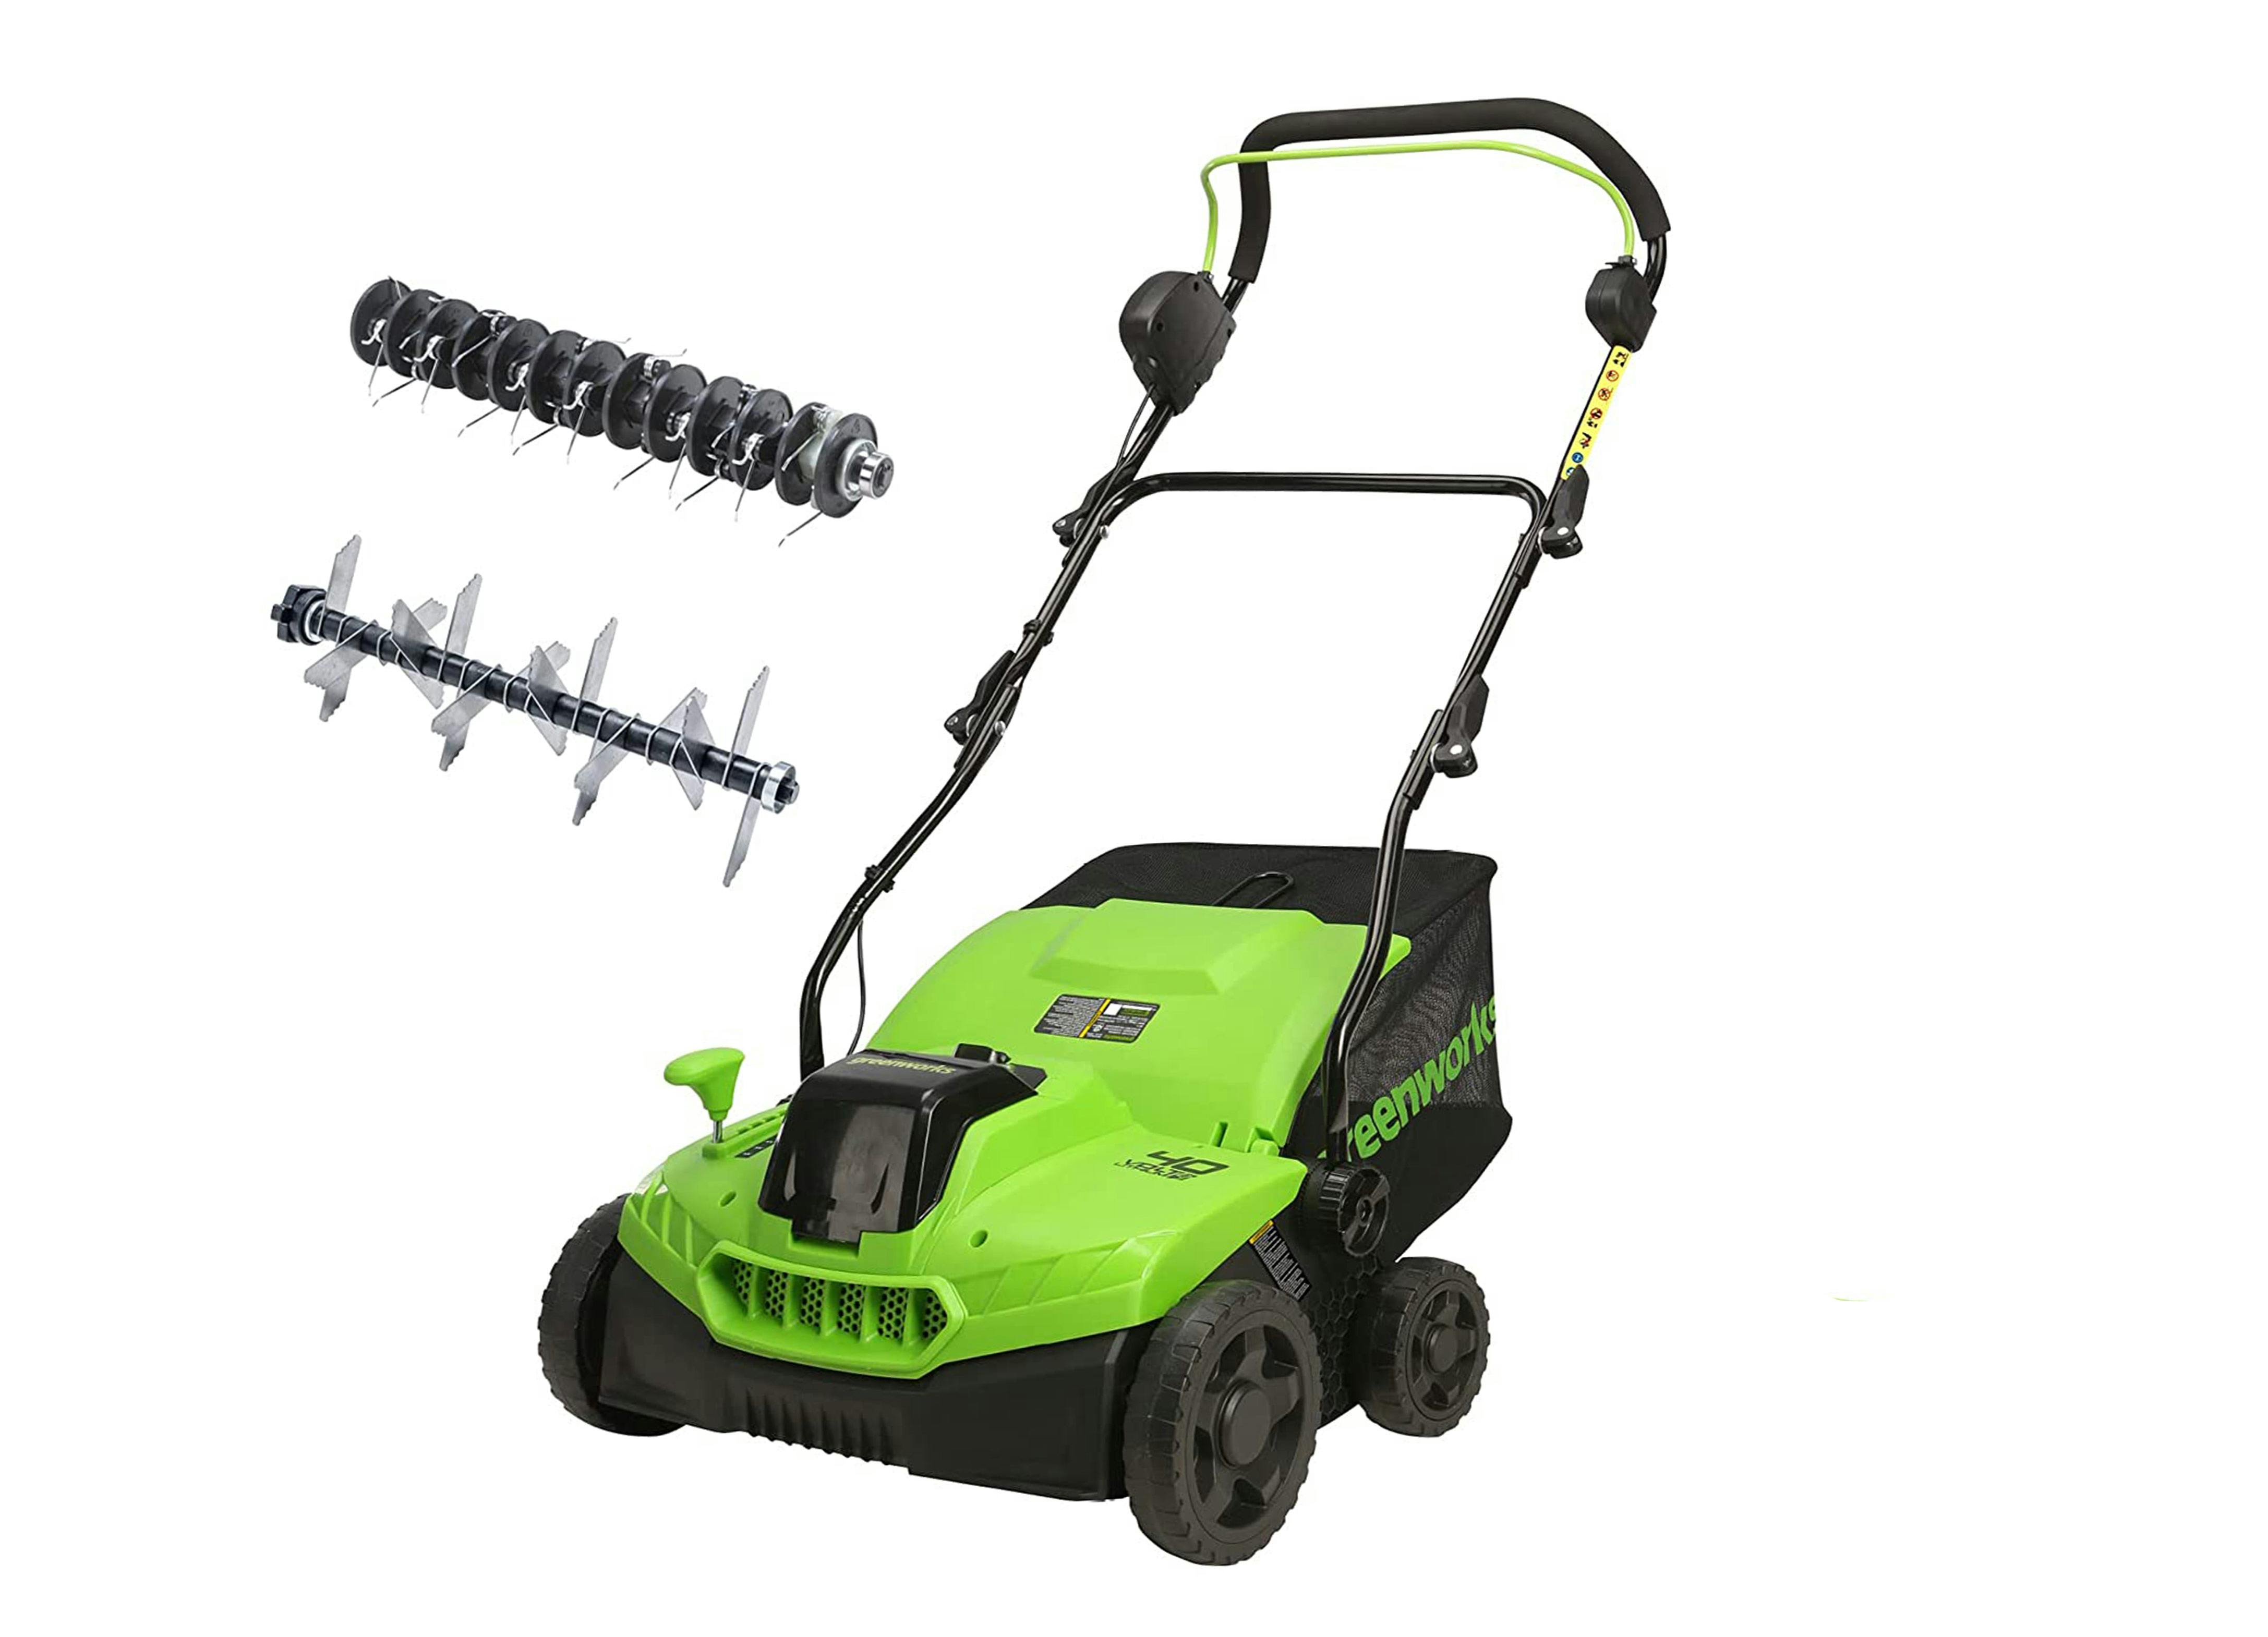 Greenworks Scarifier Brushless 40V 360mm Skin - Electric - Lawnmowers -  Outdoor Power Equipment - Gardening at Trade Tested